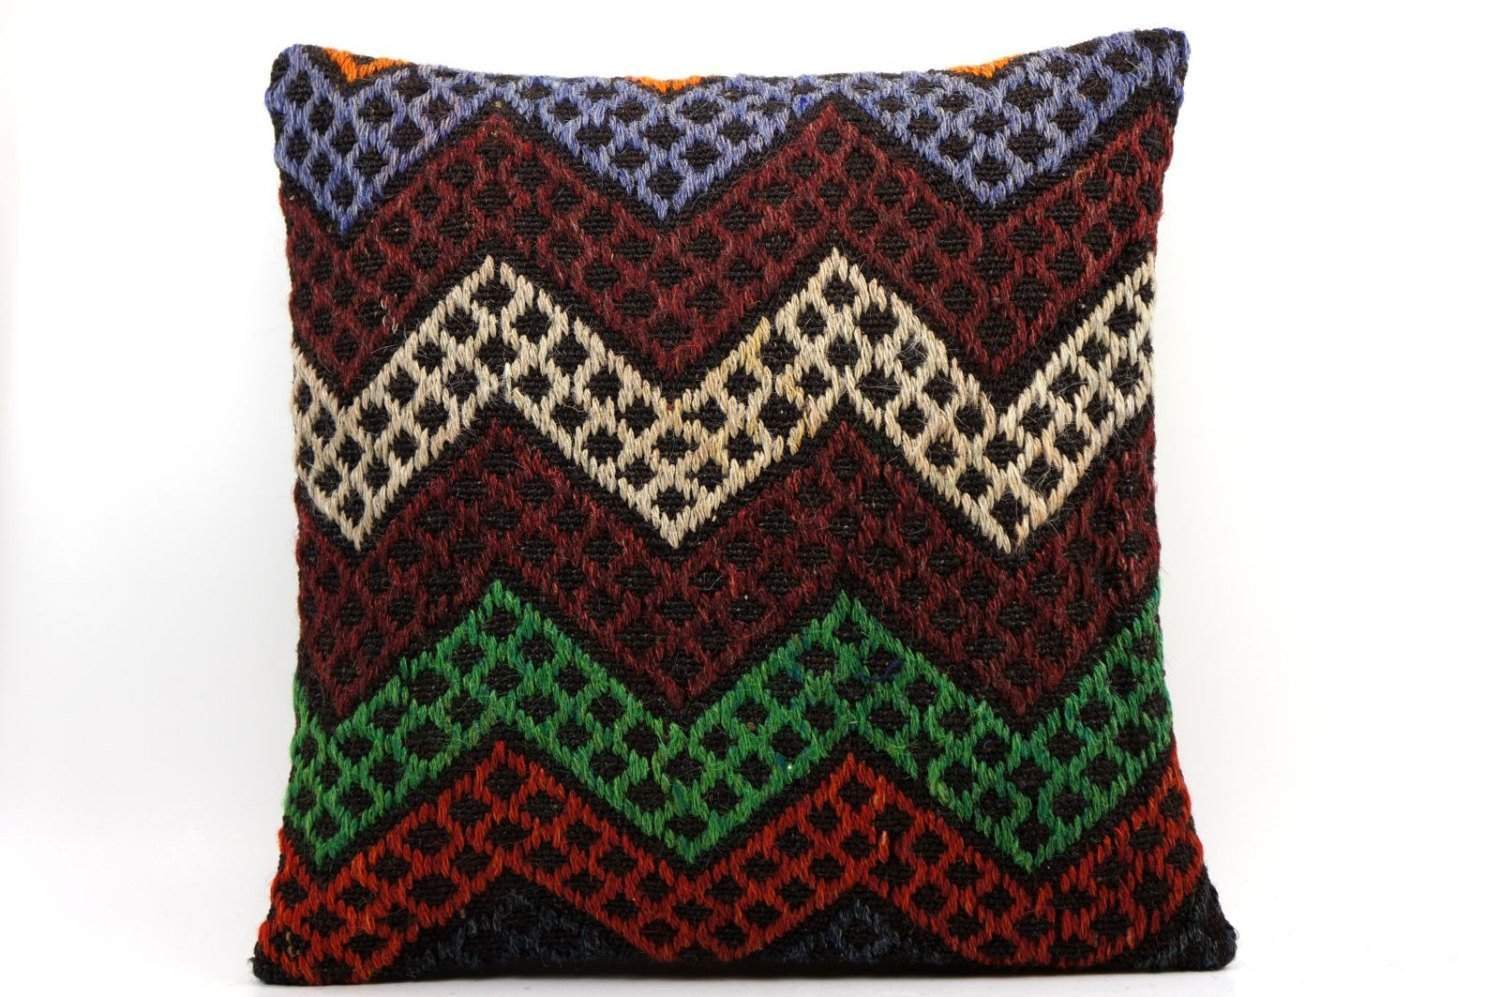 CLEARANCE 16x16 Vintage Hand Woven Kilim Pillow  498,white,green,blue,black,red,claret red,chevron - kilimpillowstore
 - 1